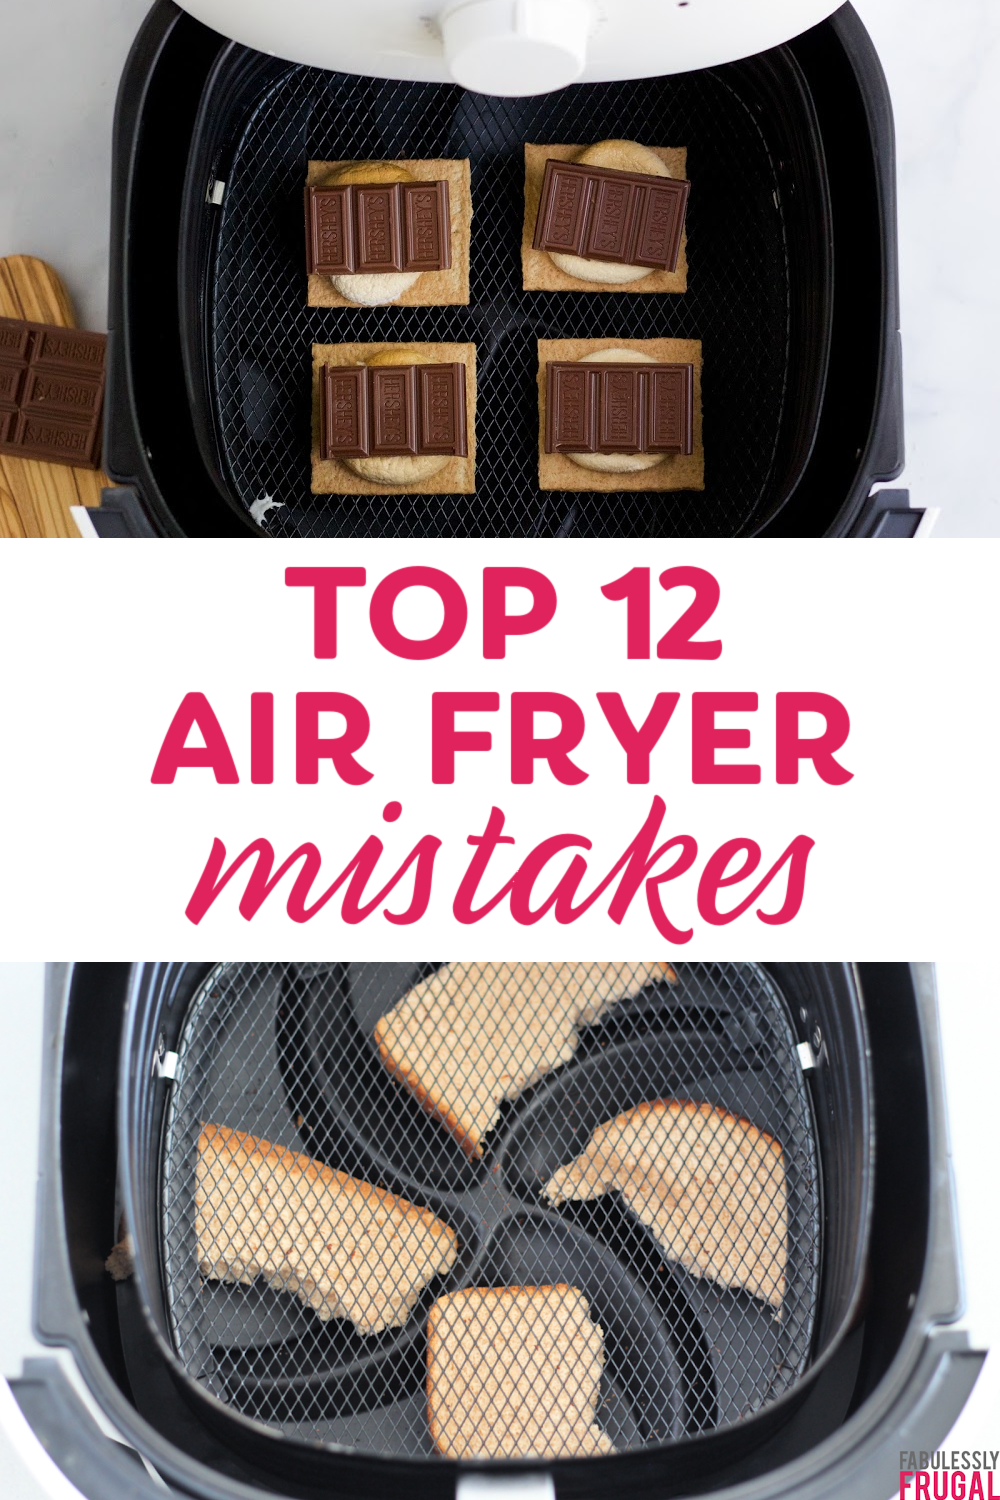 https://fabulesslyfrugal.com/wp-content/uploads/2020/12/TOP-12-air-fryer-mistakes-pin-.png